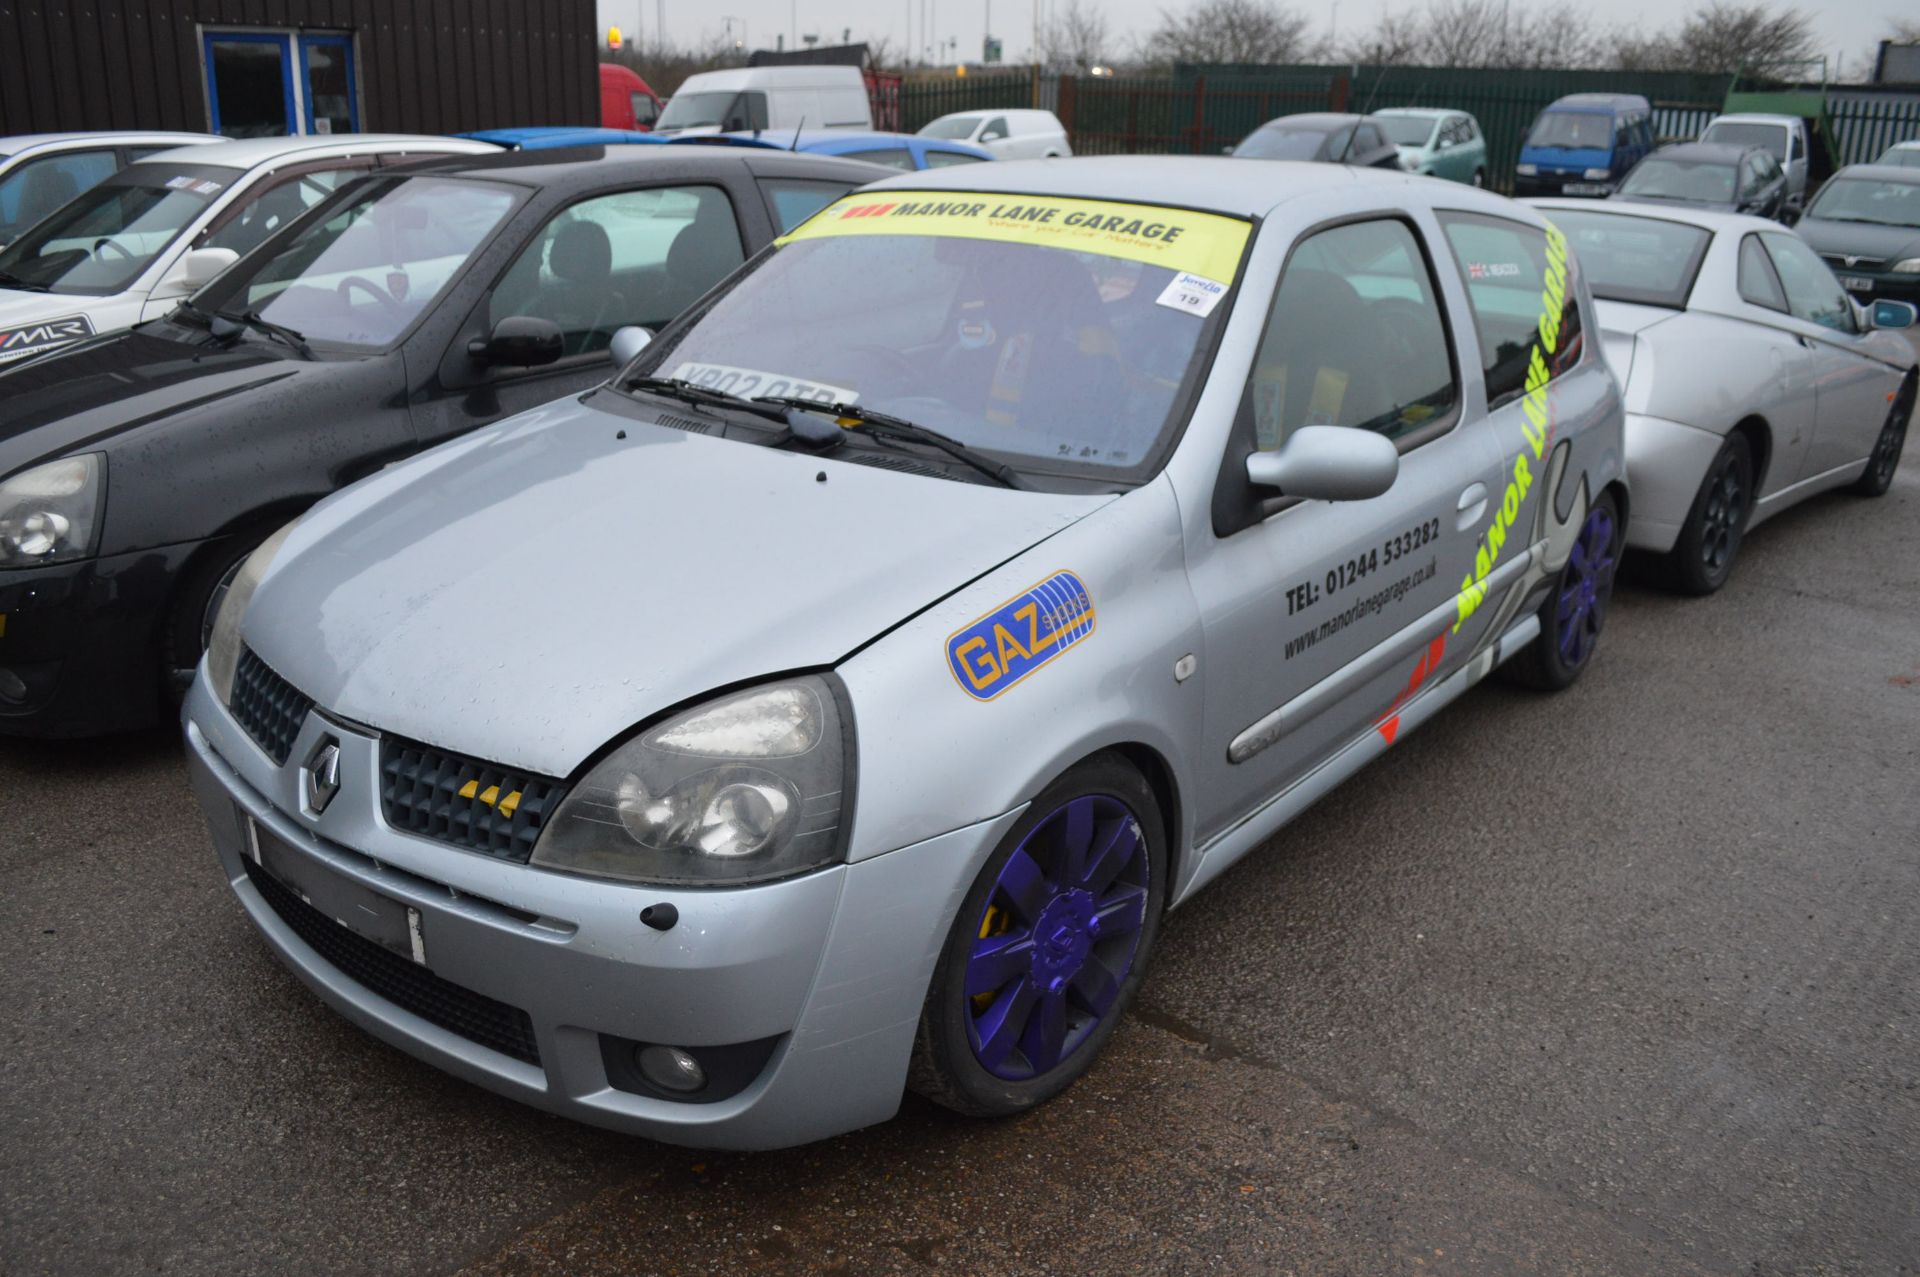 2002/02 REG RENAULT CLIO 2.0 SPORT TRACK/RACE CAR STRIPPED FOR TRACK DAYS - Image 3 of 14